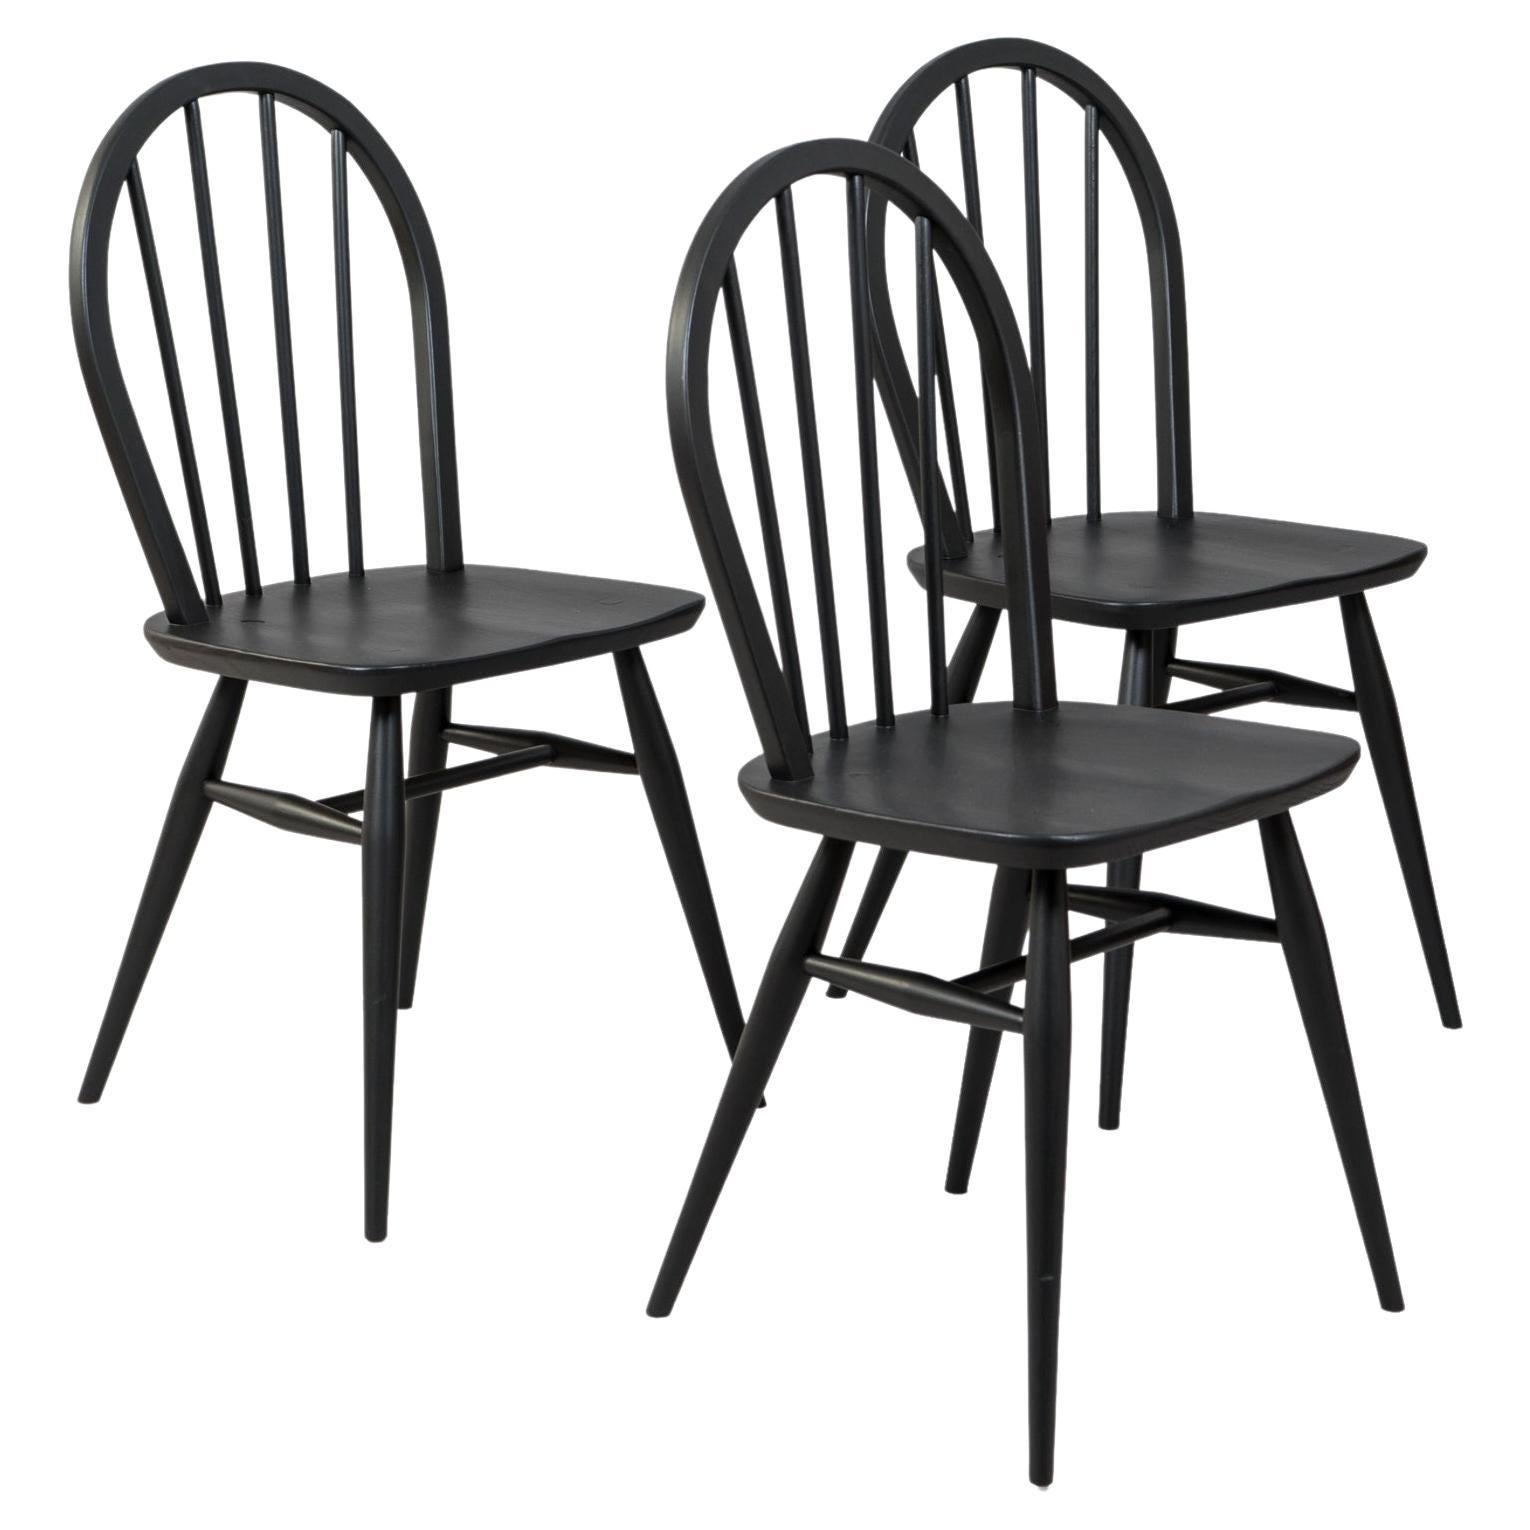 Set of 3 Black Windsor Chair by Lucian Ercolani for Ercol, circa 1960